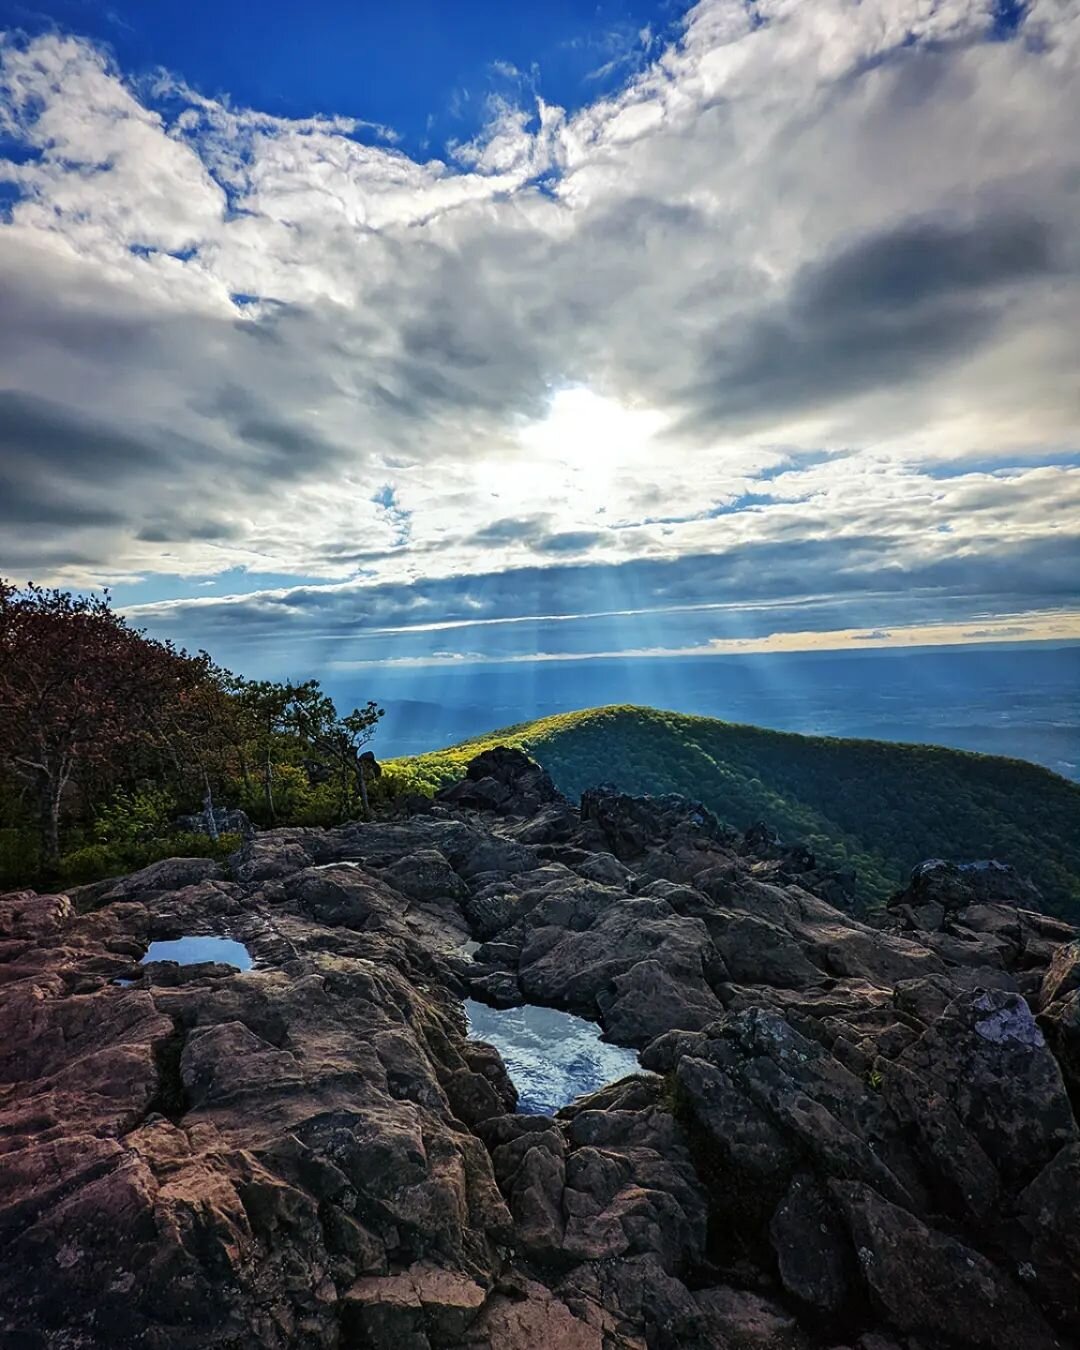 I'm a week late, but wanted to drop a few photos from Memorial Day Weekend down in #ShenandoahNationalPark 

We got a chance to see why Old Rag is so highly-praised (it's great!), but the length and technical scramble portions meant I didn't want to 